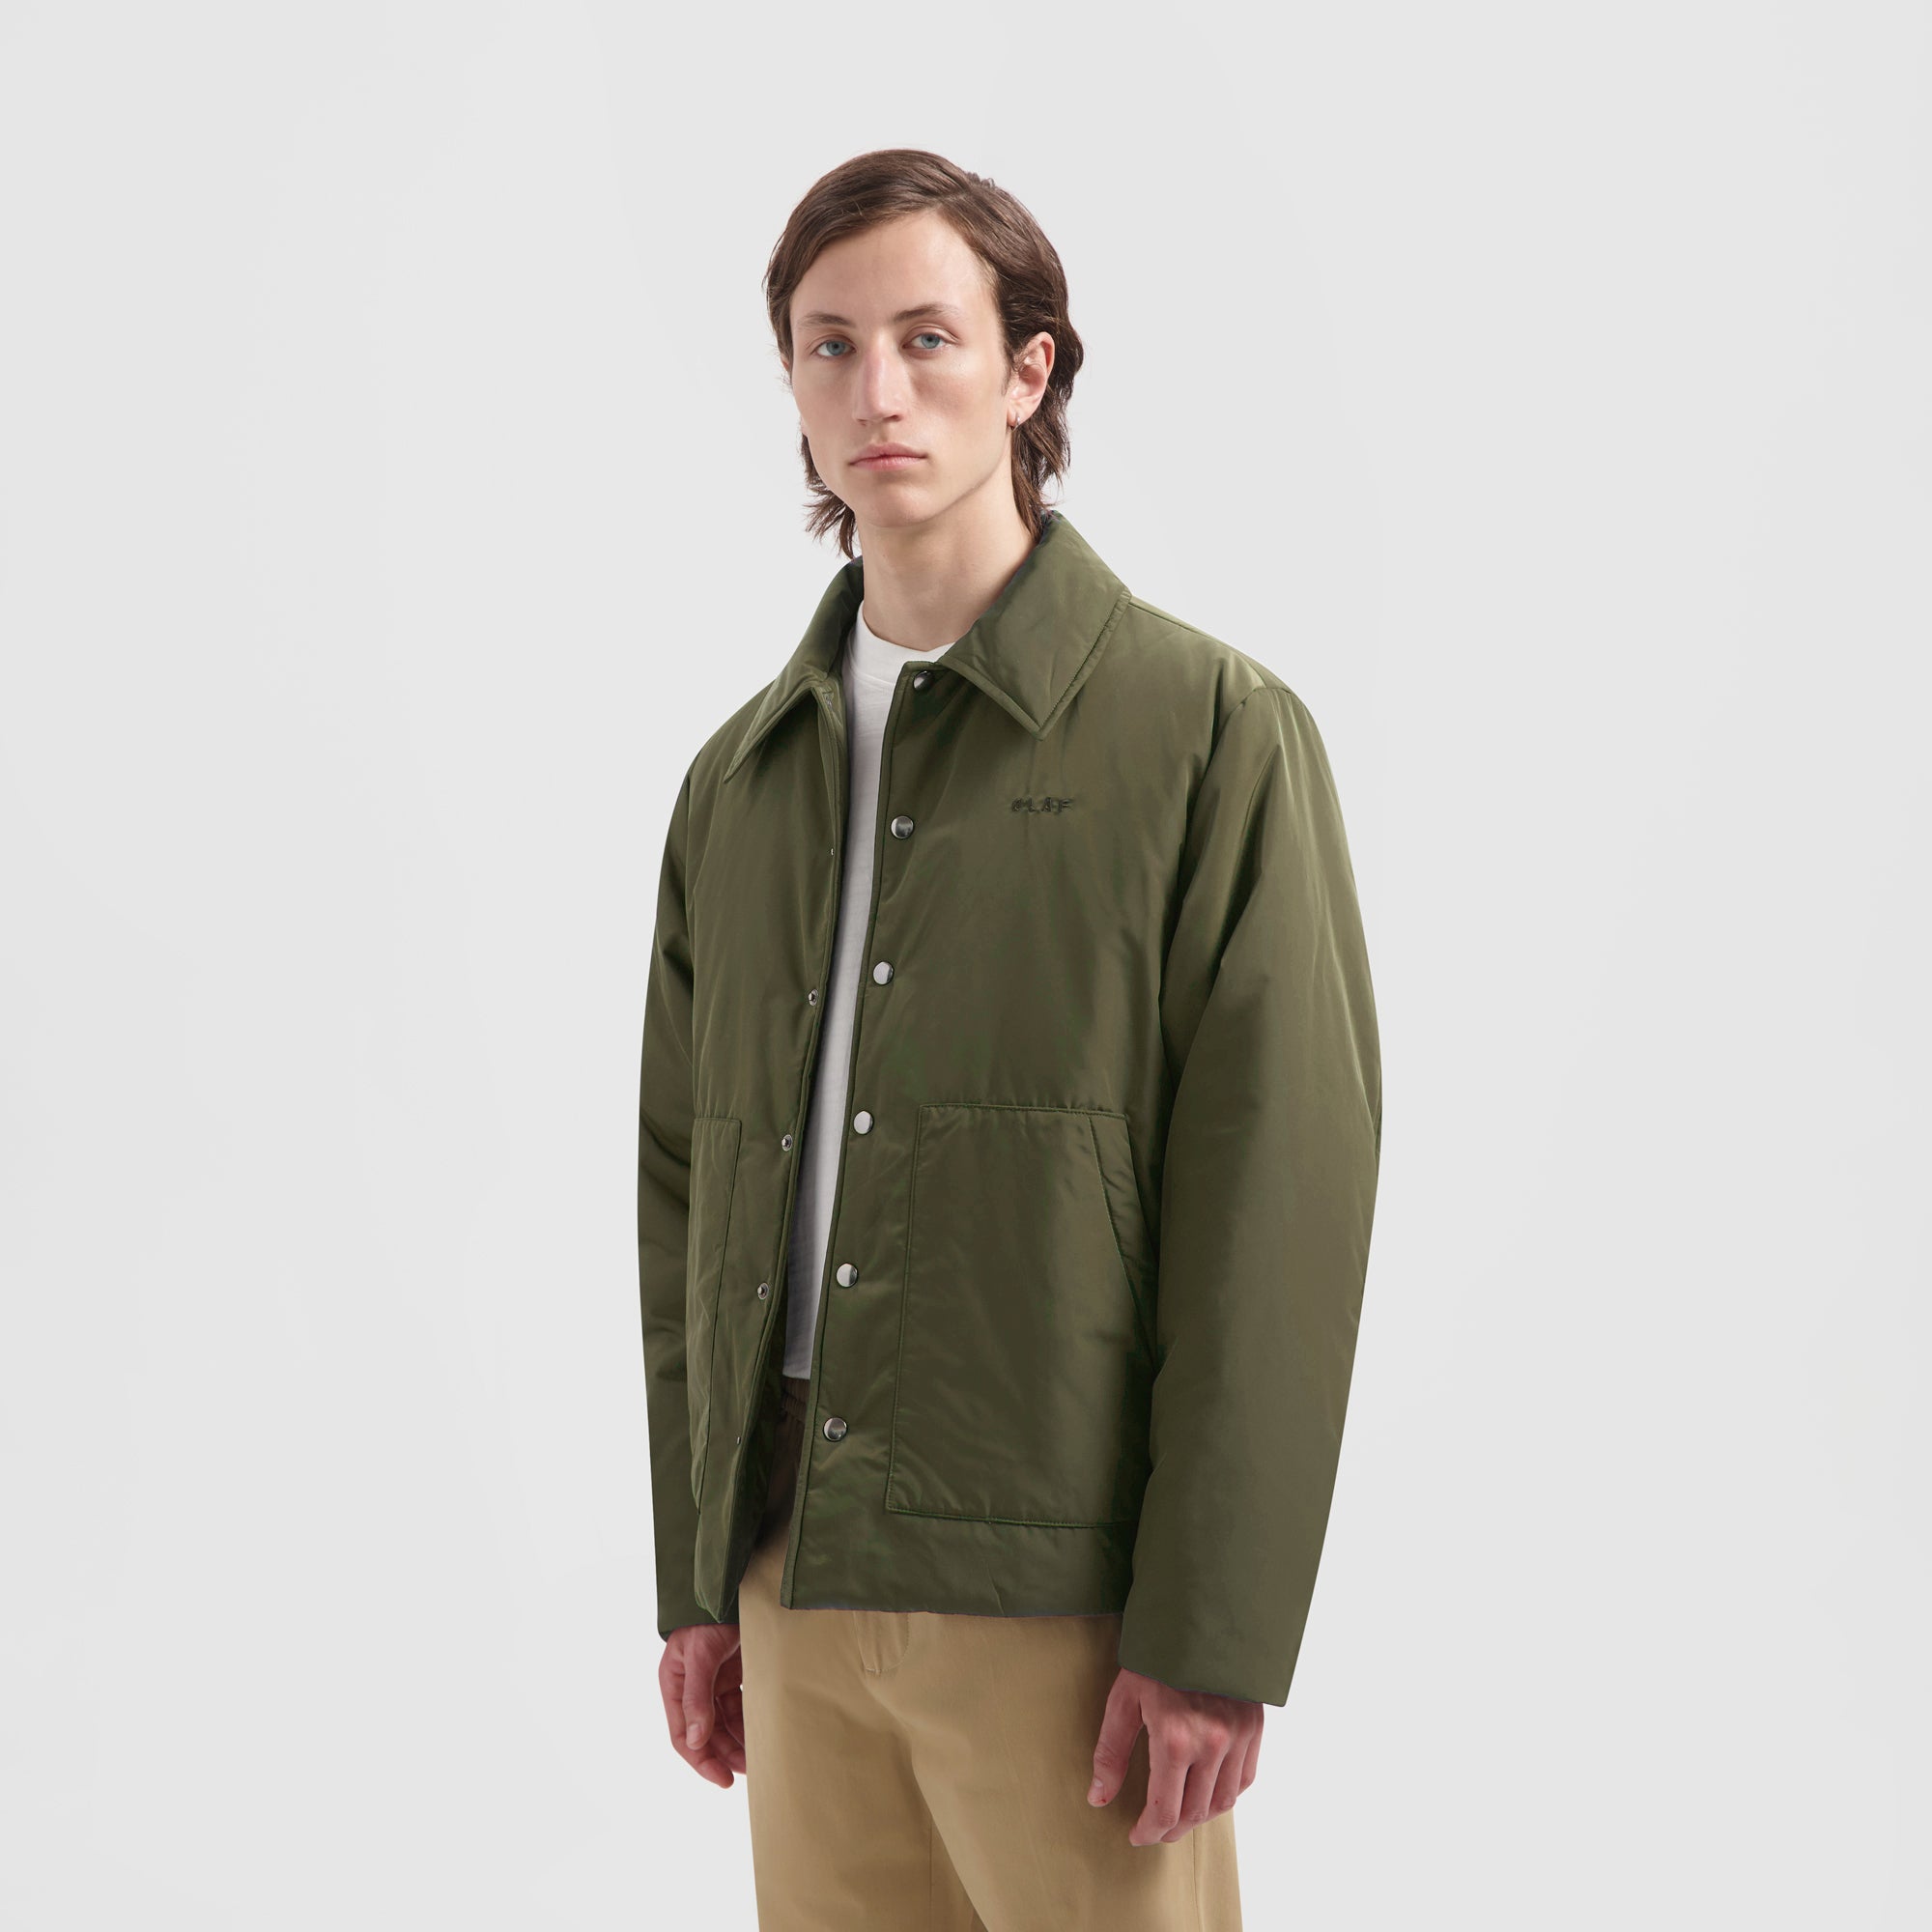 UNIVERSAL PRODUCTS COACH JACKET OLIVE 2 - 通販 - gnlexpress.ch